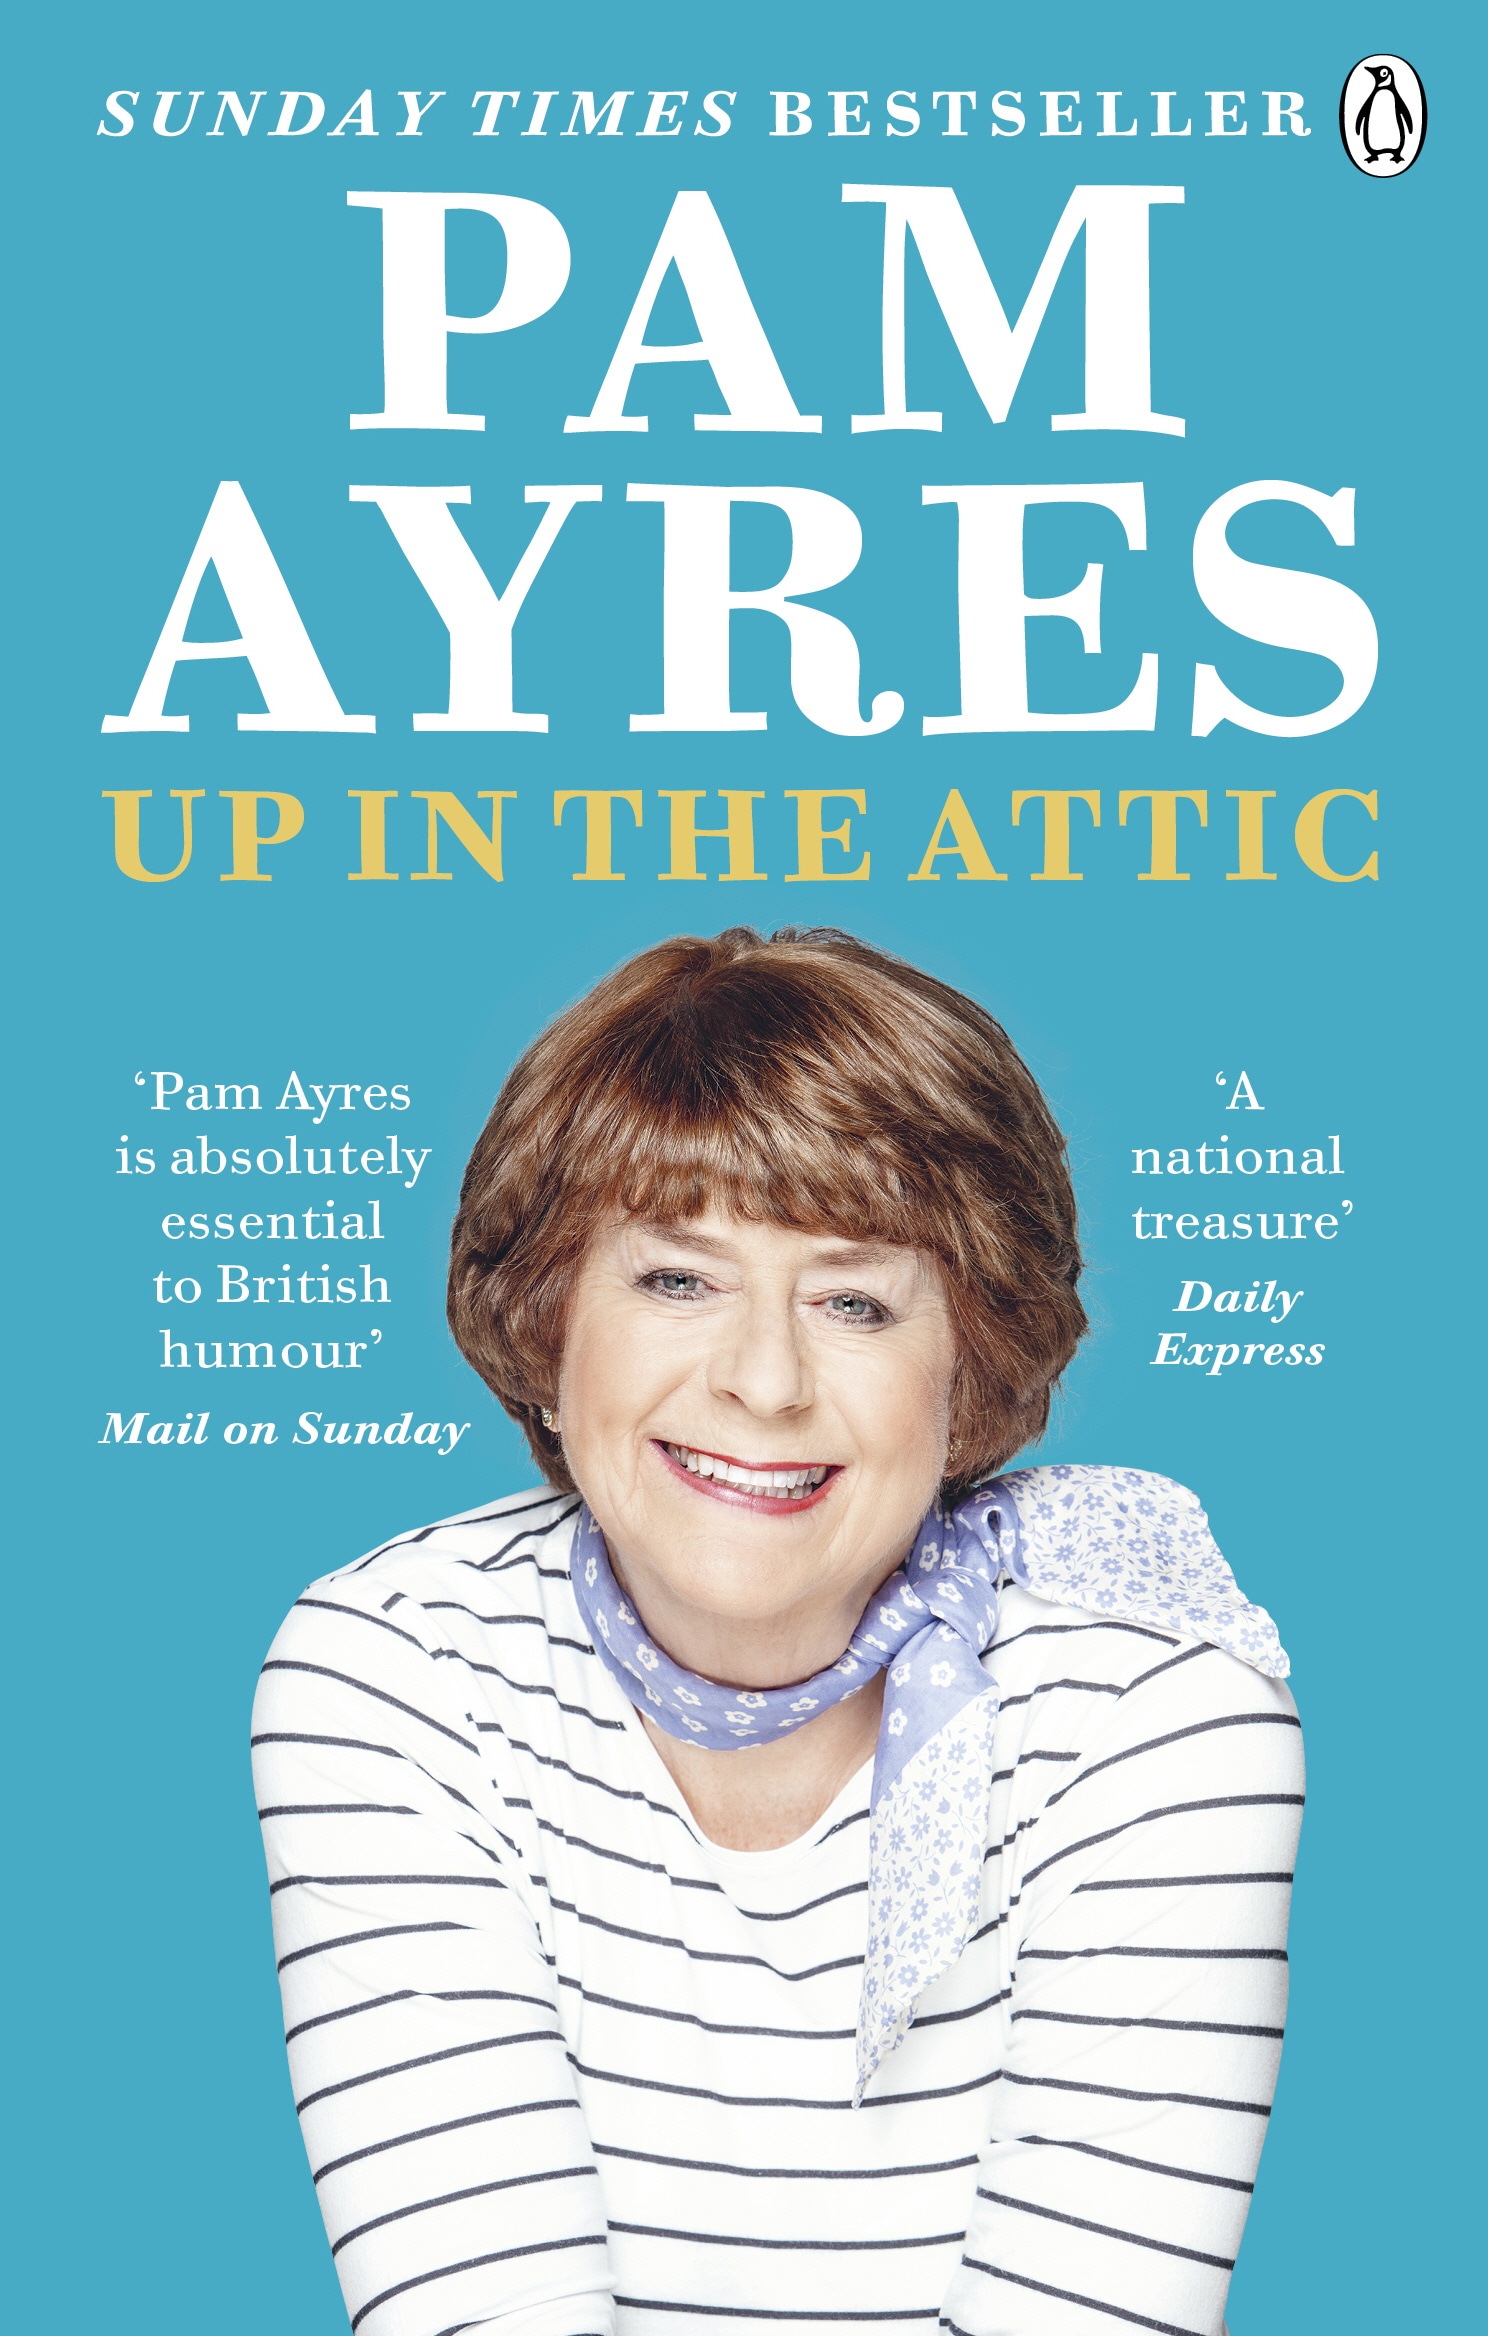 Book “Up in the Attic” by Pam Ayres — August 6, 2020